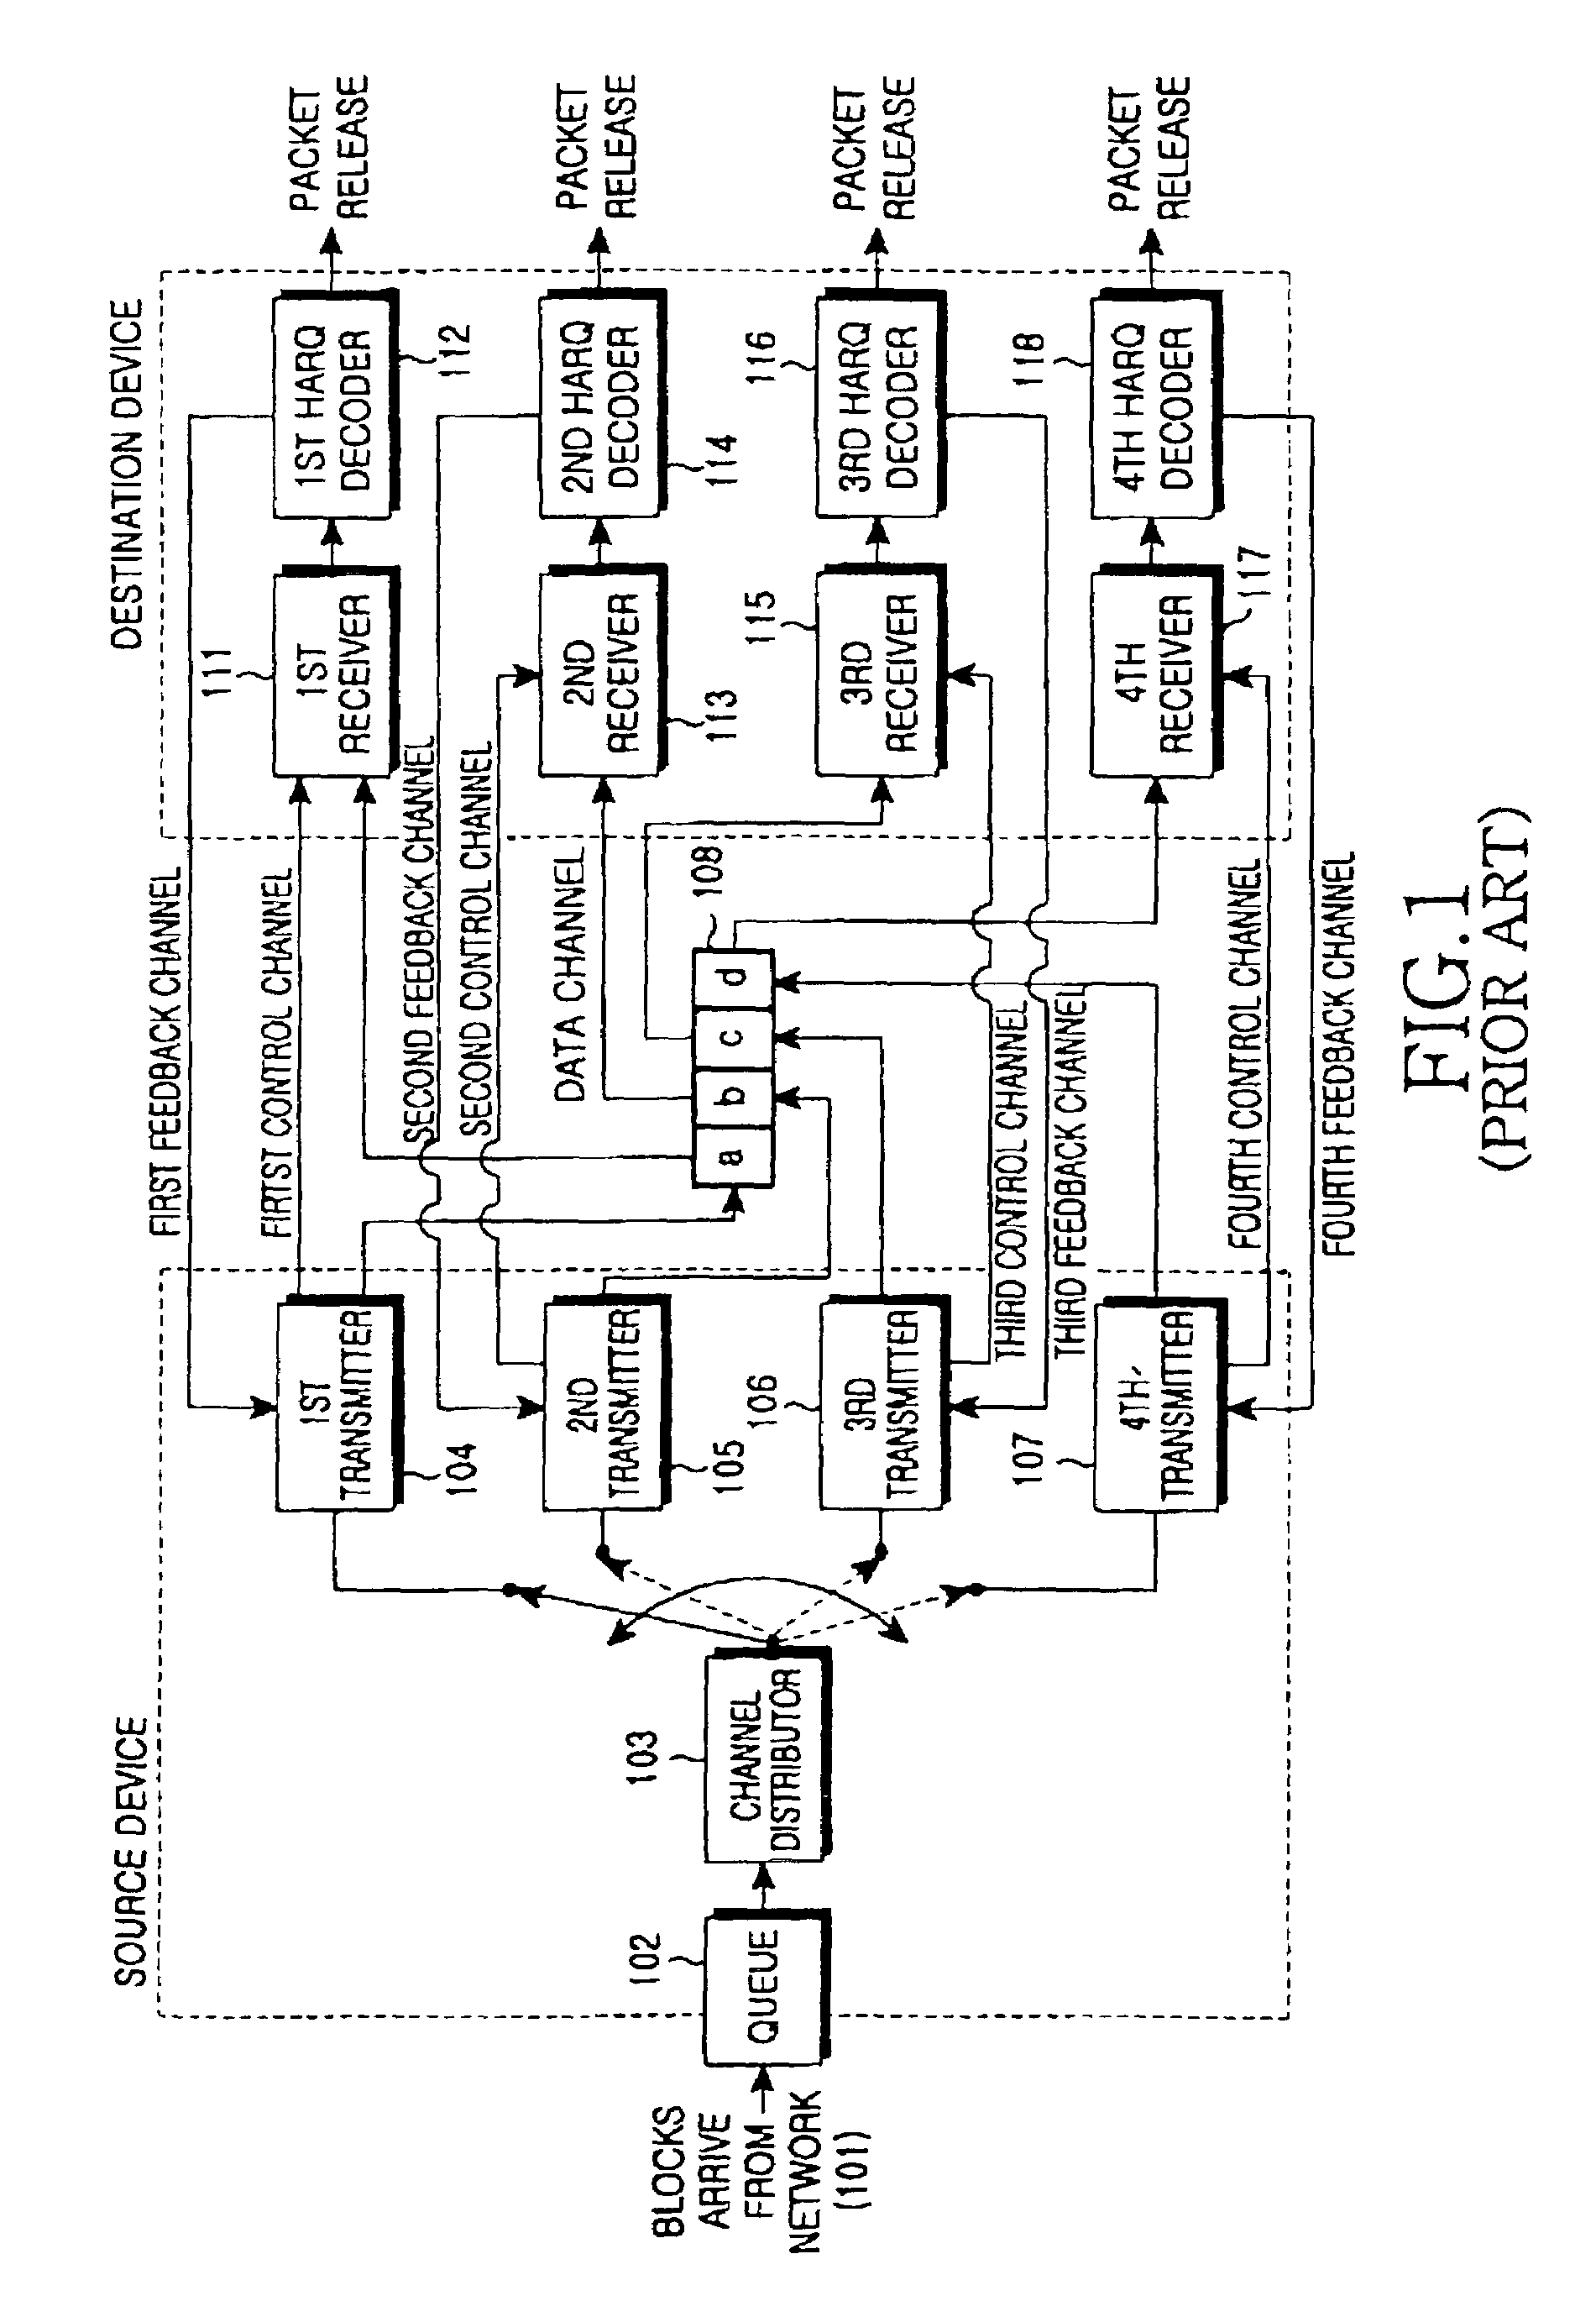 Signaling method between MAC entities in a packet communication system